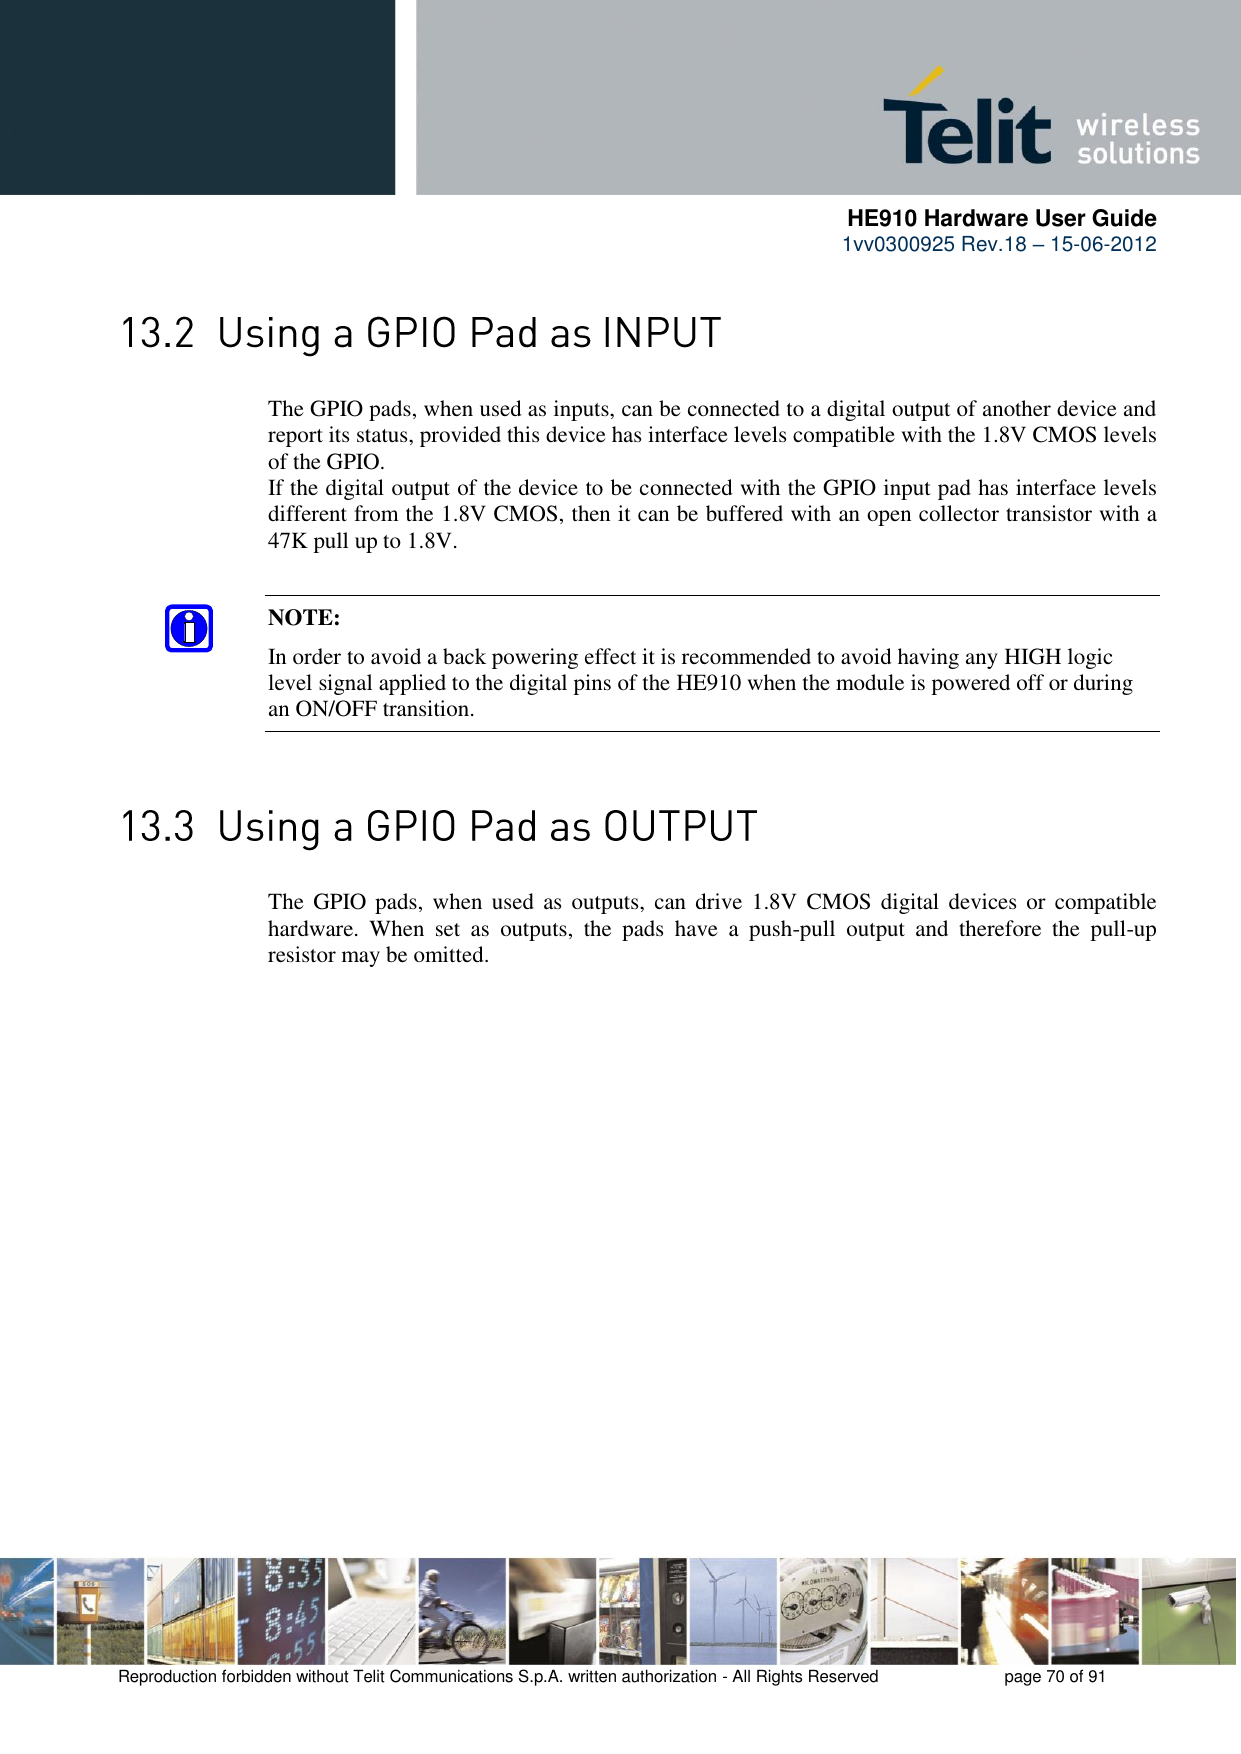      HE910 Hardware User Guide 1vv0300925 Rev.18 – 15-06-2012    Reproduction forbidden without Telit Communications S.p.A. written authorization - All Rights Reserved    page 70 of 91   The GPIO pads, when used as inputs, can be connected to a digital output of another device and report its status, provided this device has interface levels compatible with the 1.8V CMOS levels of the GPIO.  If the digital output of the device to be connected with the GPIO input pad has interface levels different from the 1.8V CMOS, then it can be buffered with an open collector transistor with a 47K pull up to 1.8V. NOTE: In order to avoid a back powering effect it is recommended to avoid having any HIGH logic level signal applied to the digital pins of the HE910 when the module is powered off or during an ON/OFF transition.  The  GPIO pads,  when  used  as  outputs, can drive  1.8V CMOS  digital  devices or  compatible hardware.  When  set  as  outputs,  the  pads  have  a  push-pull  output  and  therefore  the  pull-up resistor may be omitted. 